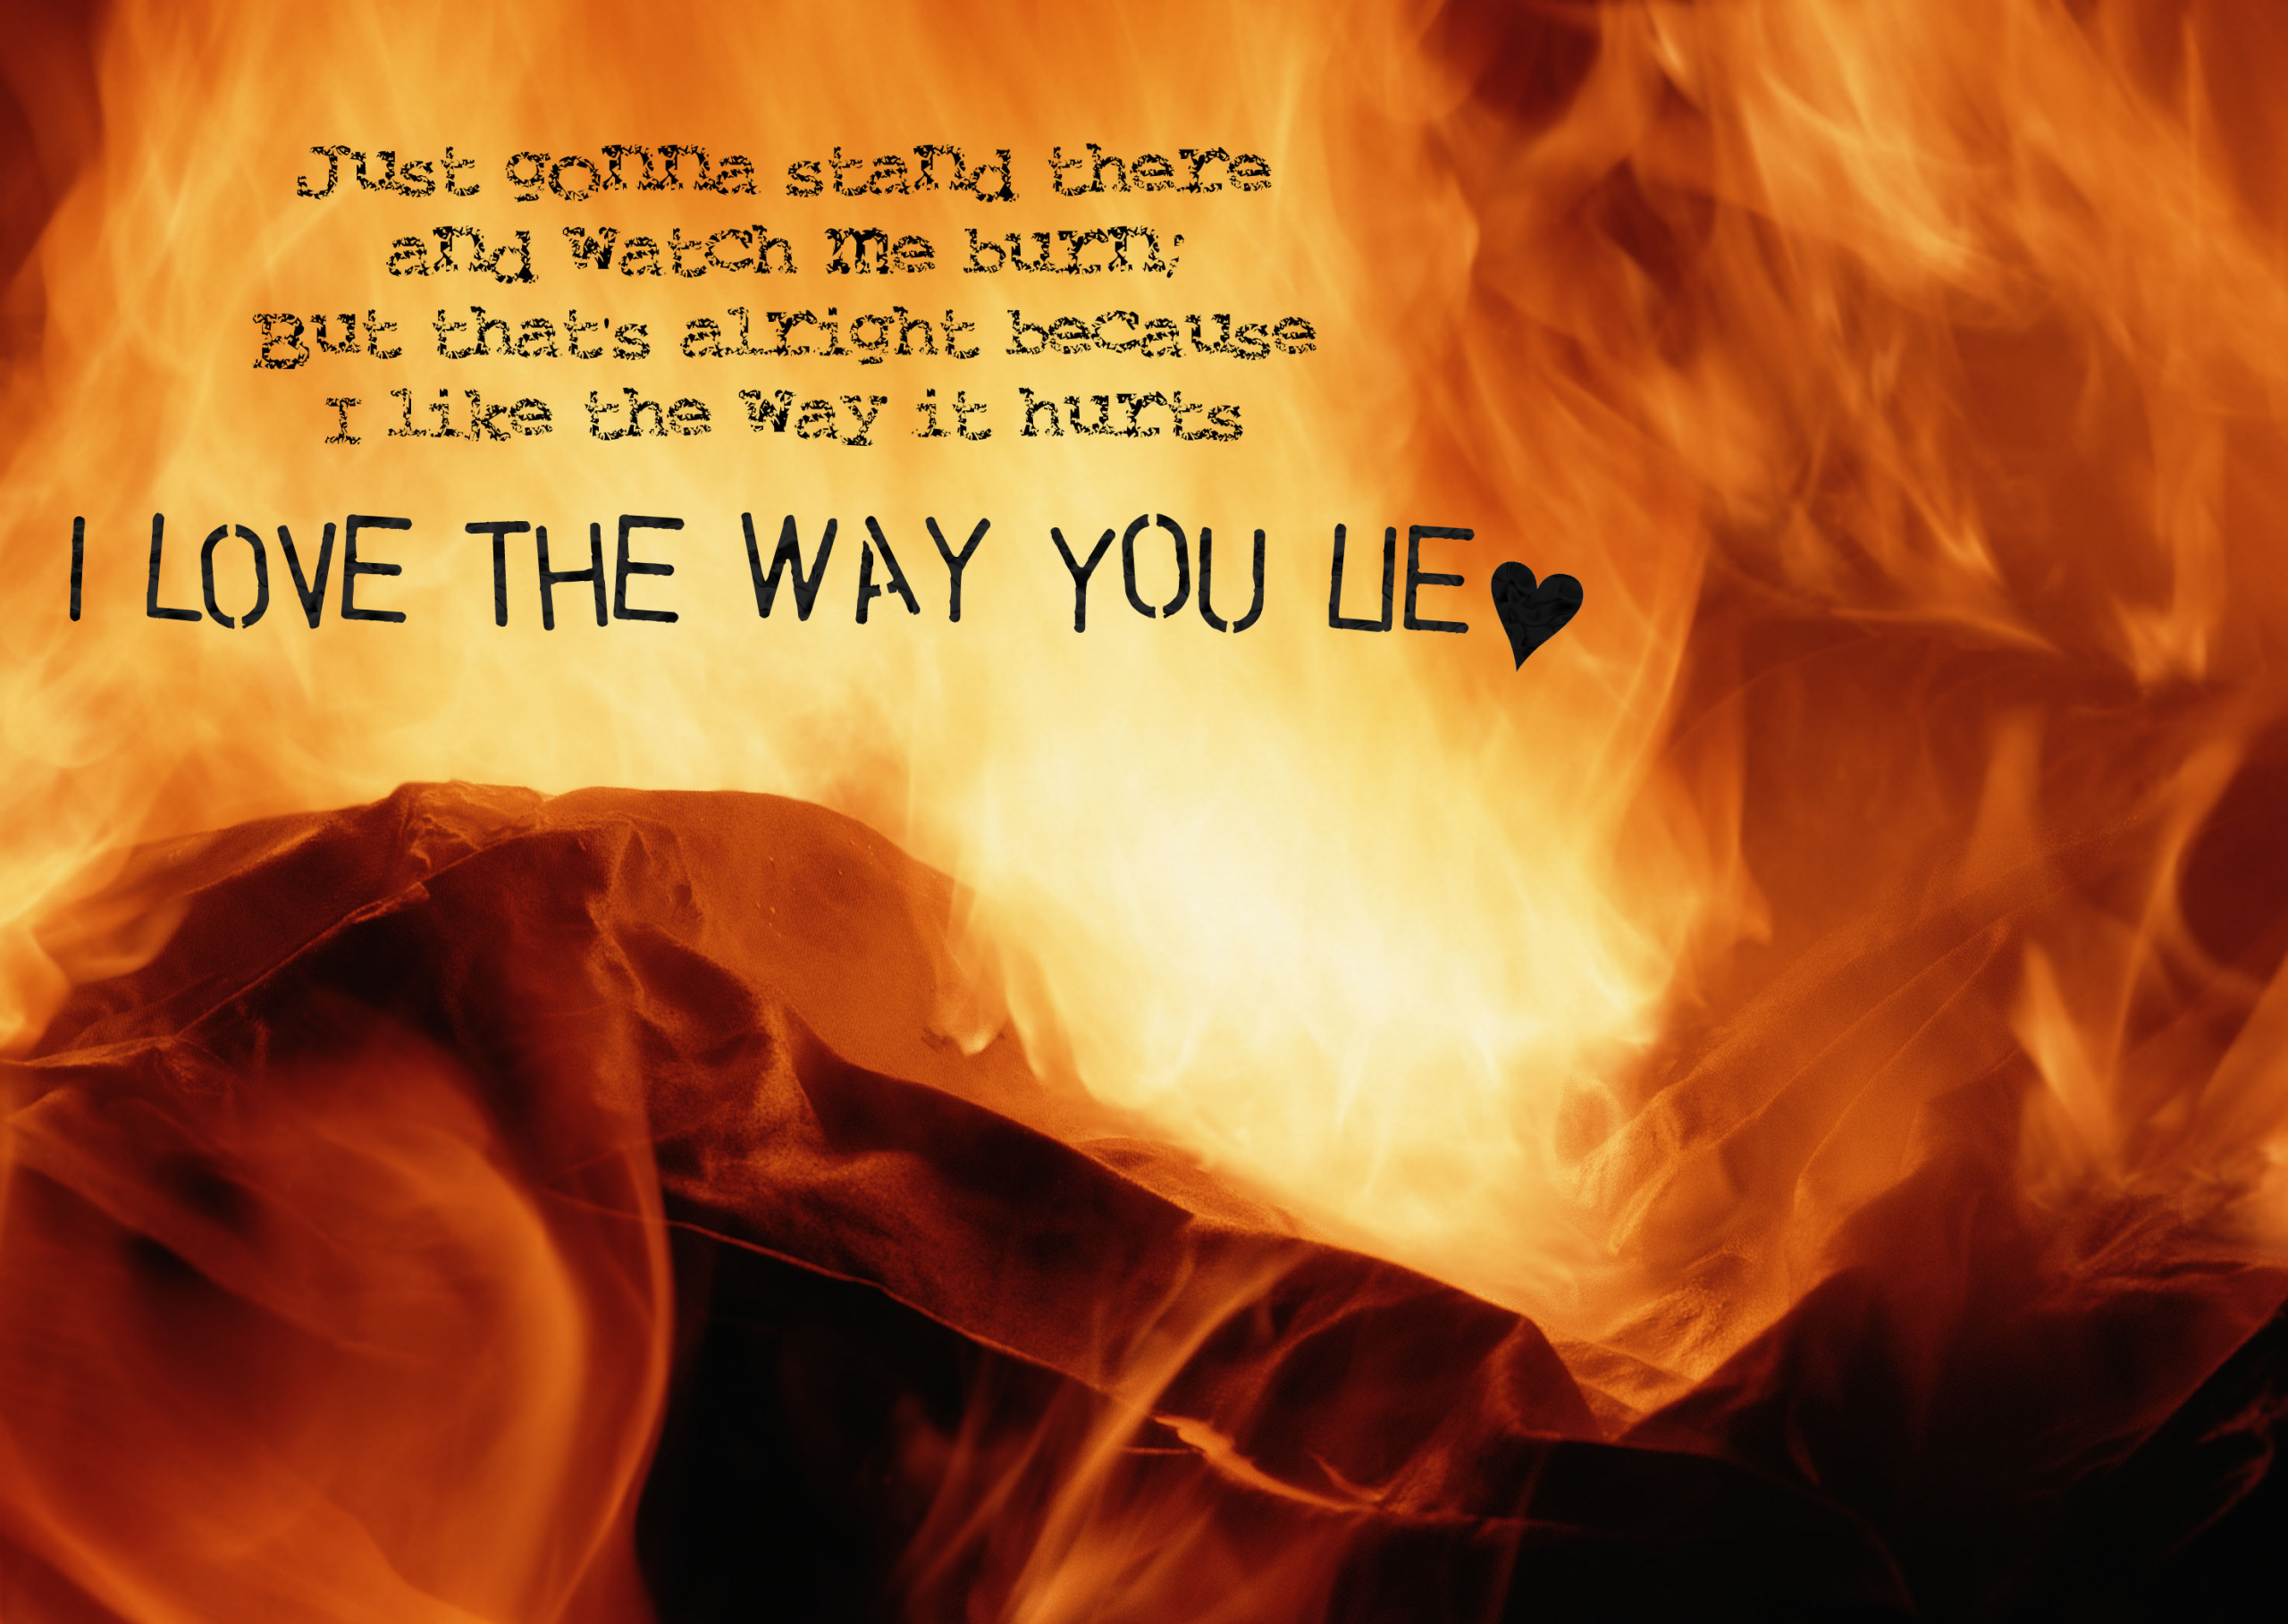 Quotes About Fire And Love
 Download Love Fire Wallpaper 2950x2094